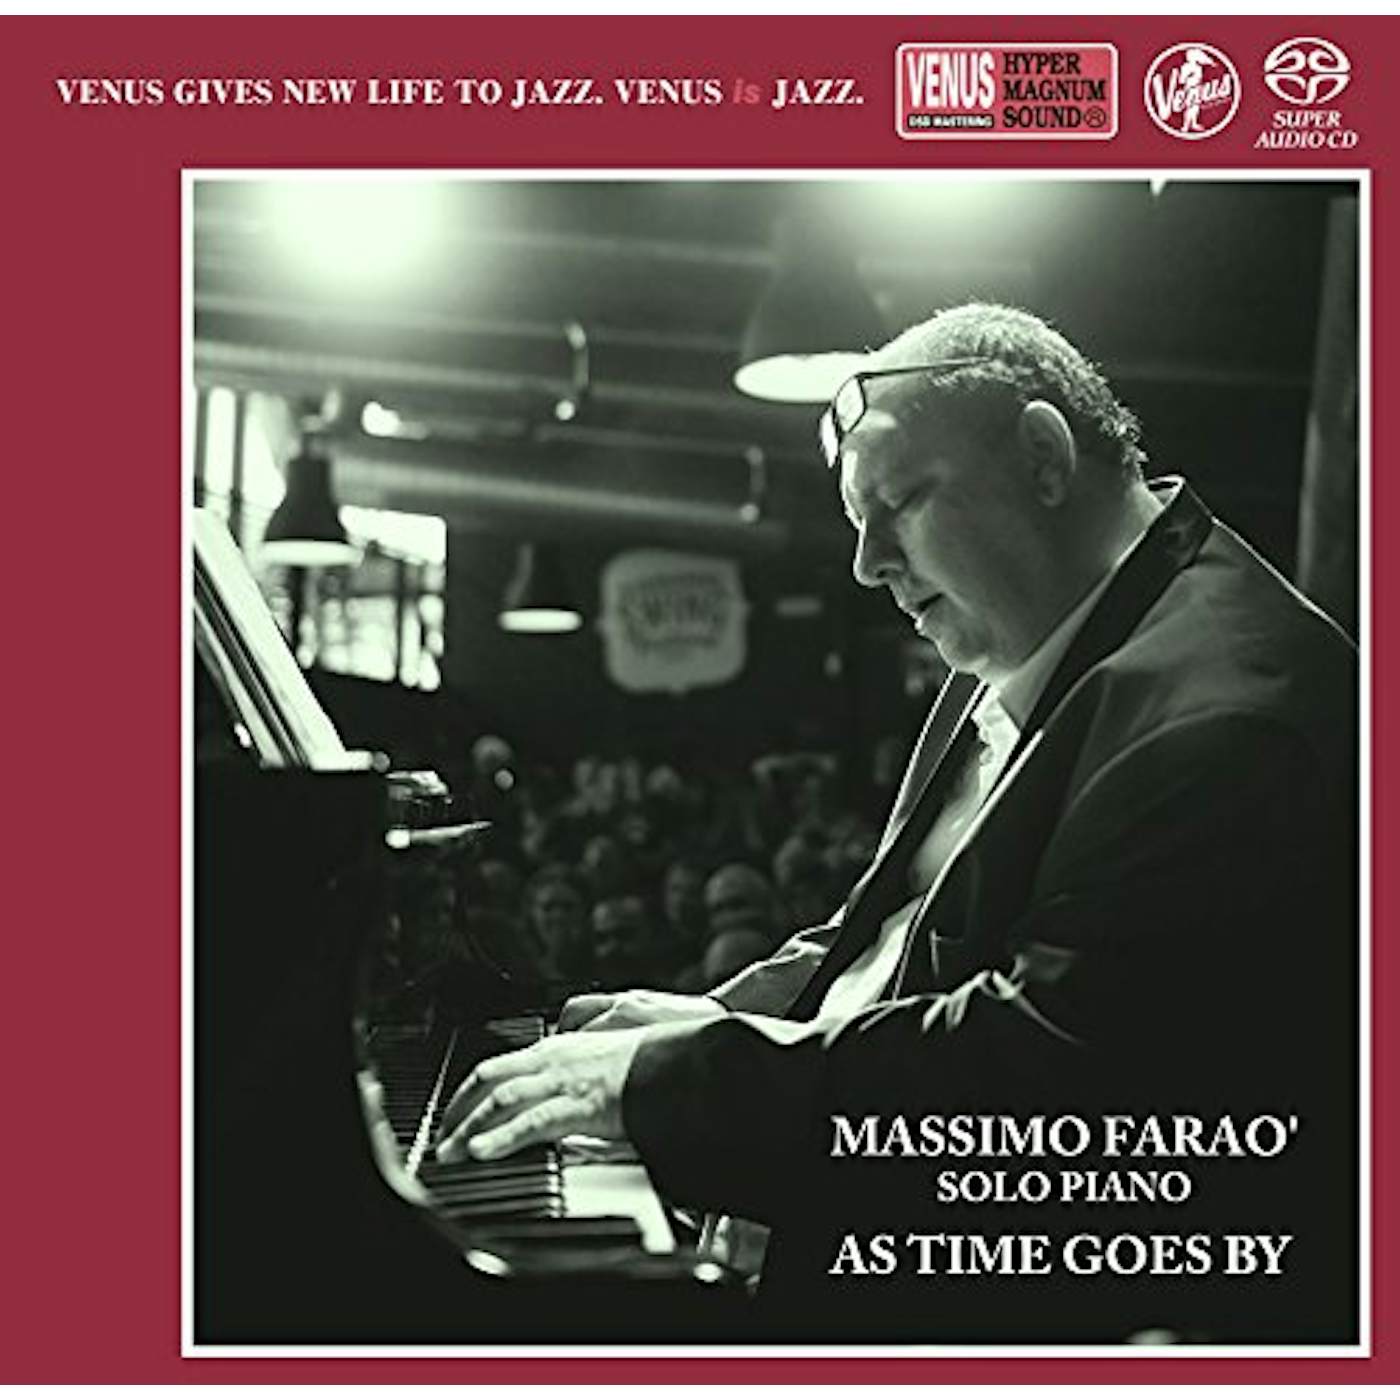 Massimo Faraò AS TIME GOES BY Super Audio CD